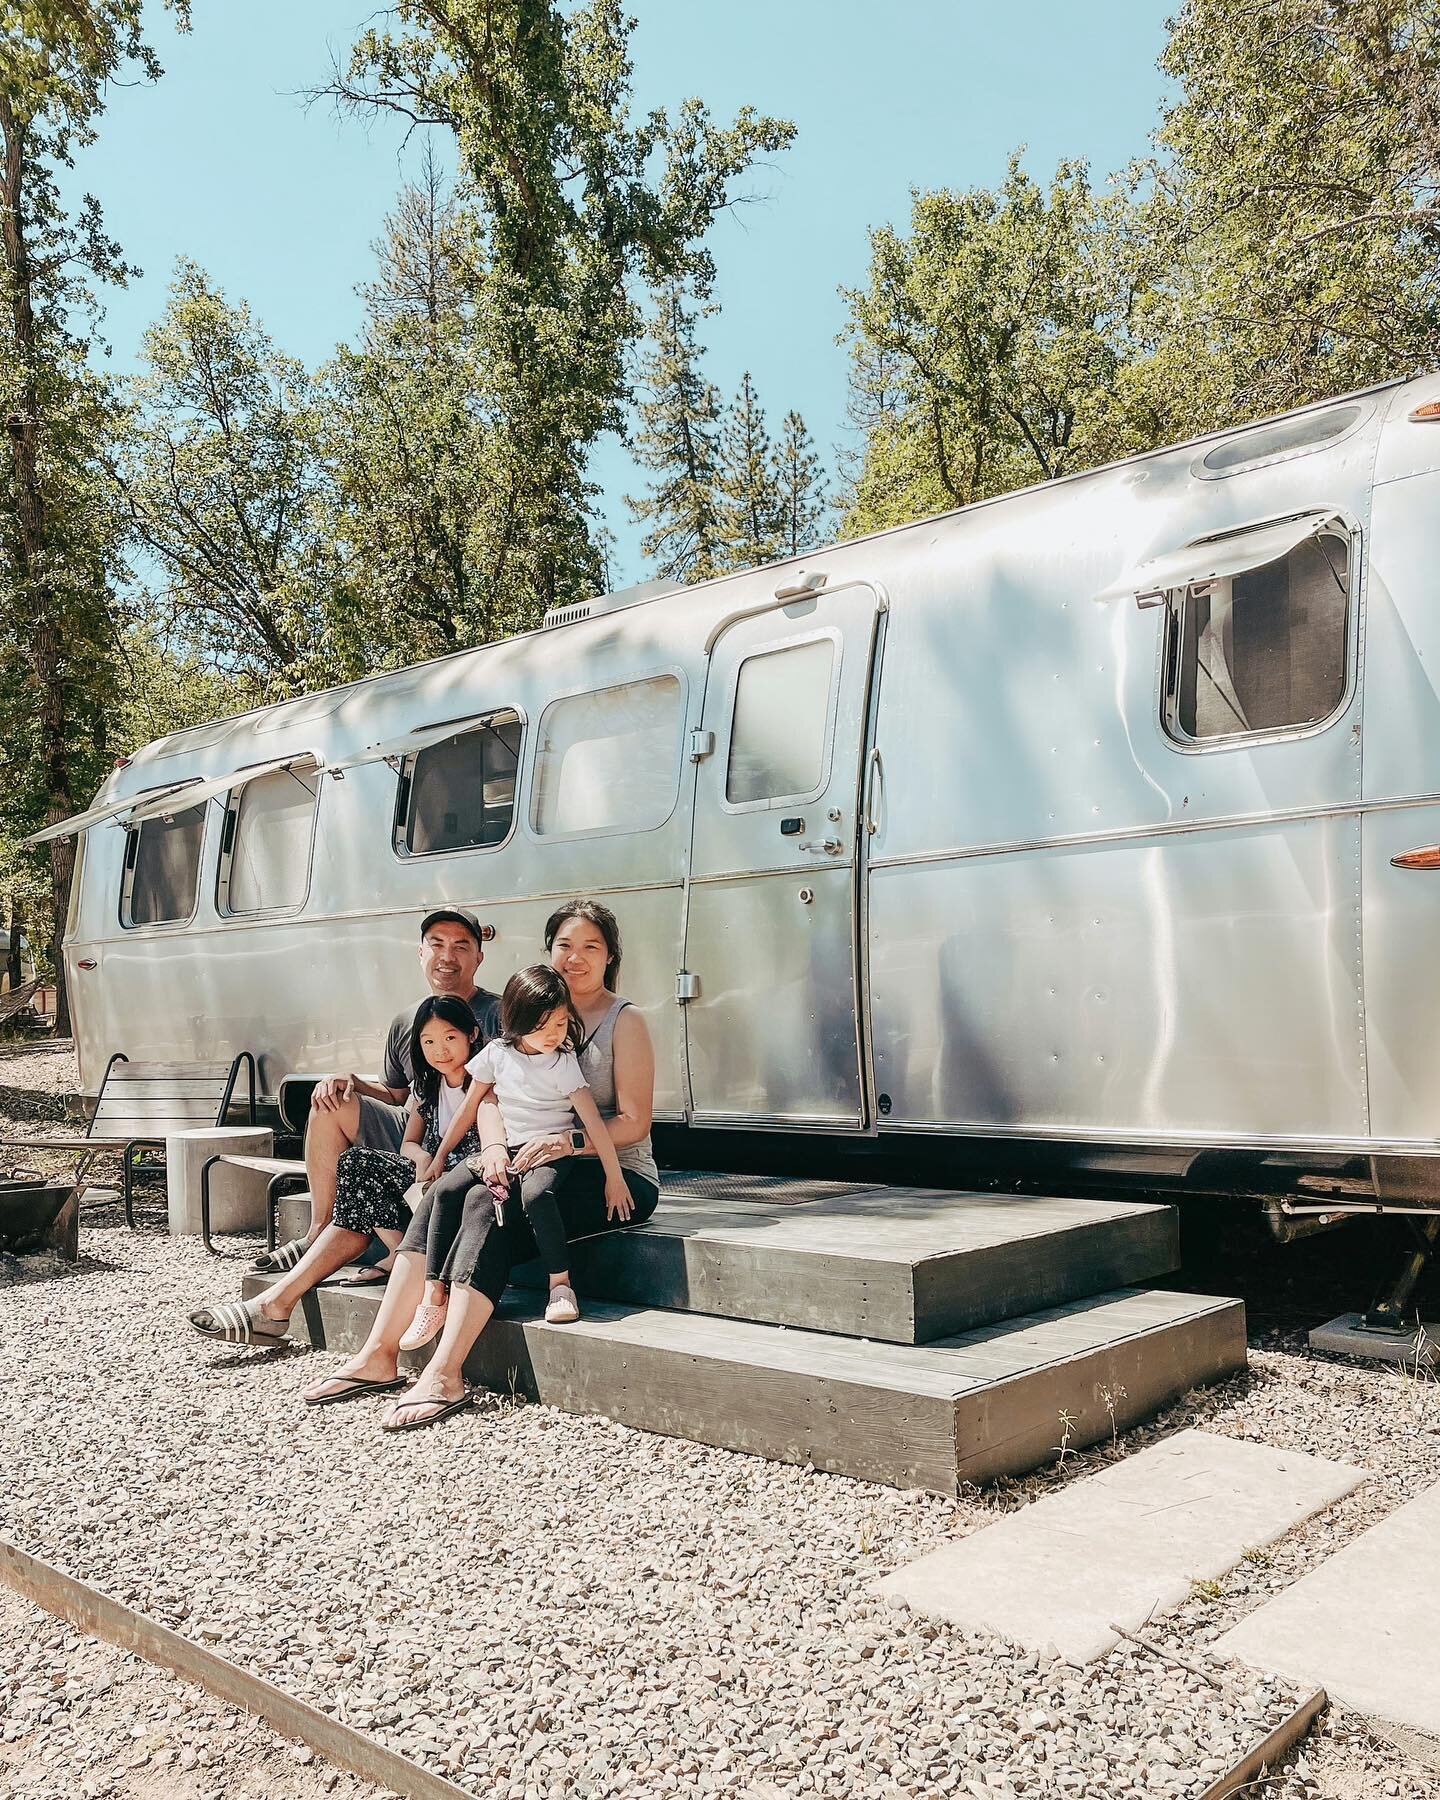 the airstream life chose us #glamping 🌲
⠀⠀⠀⠀⠀⠀⠀⠀⠀
We had the most amazing trip last month at Yosemite staying at @autocamp. If you&rsquo;re a little hesitant to do real outdoor camping with little kids like I am, staying at Autocamp has all the fun 